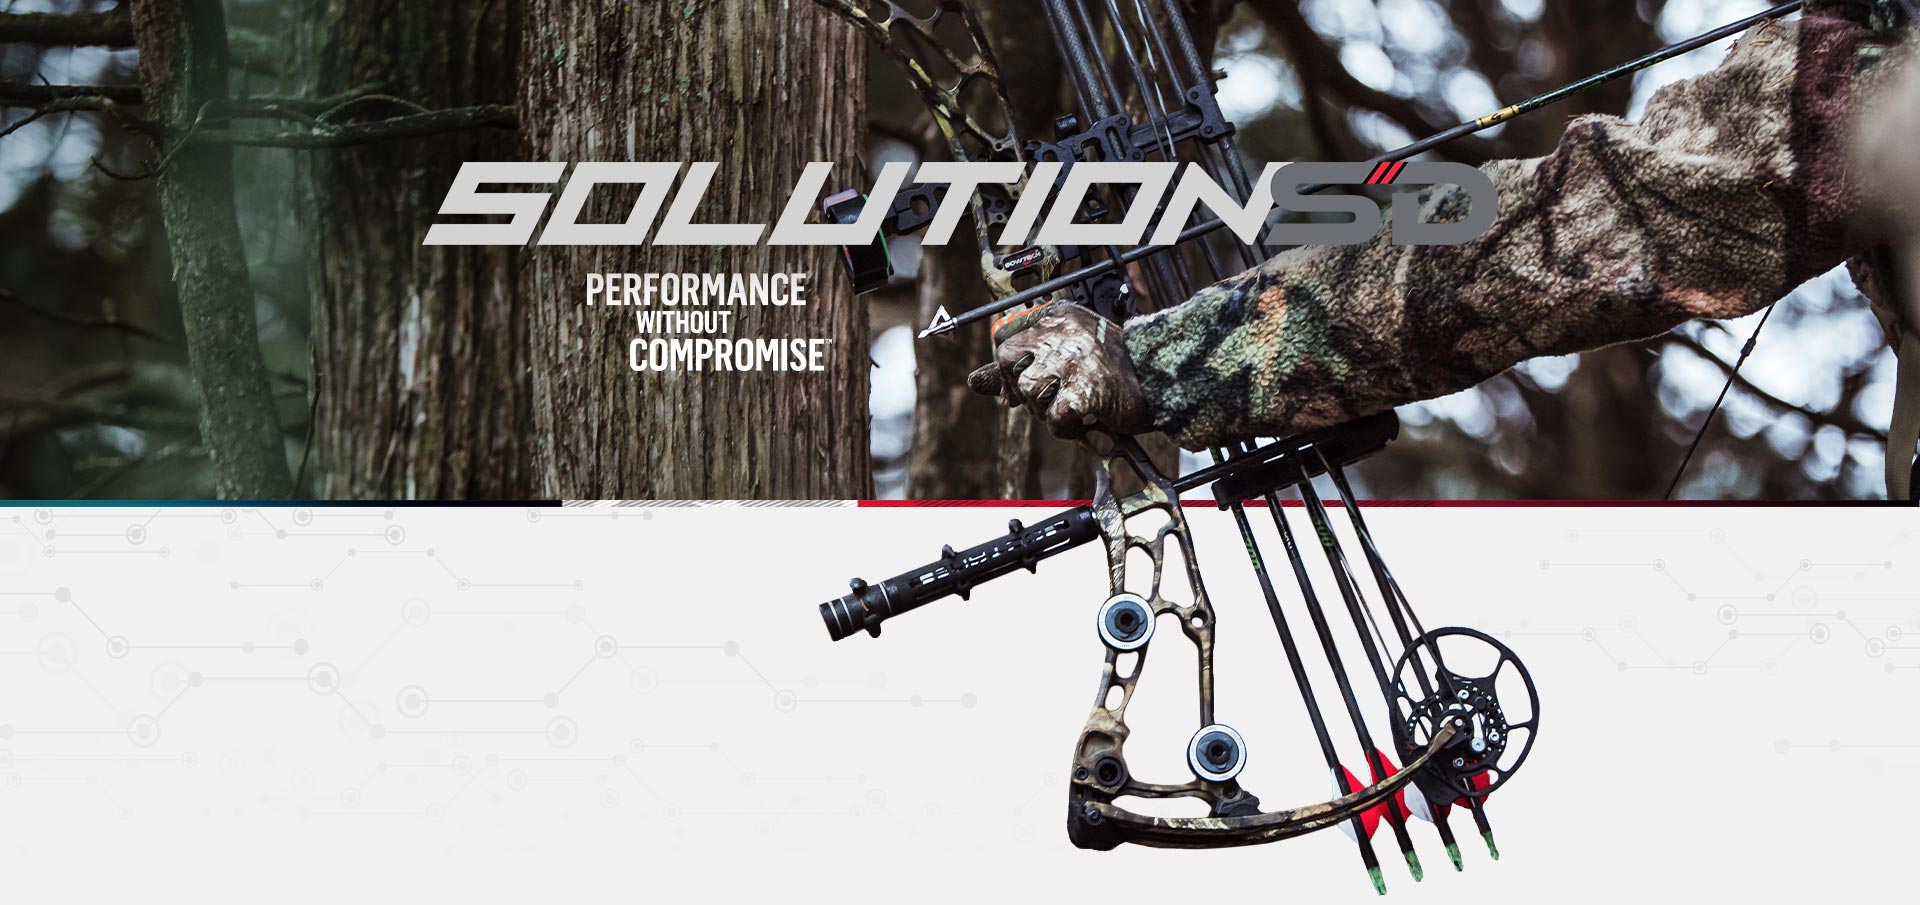 Bow hunter wearing camo clothes shooting a Bowtech Solution SD archery compound bow